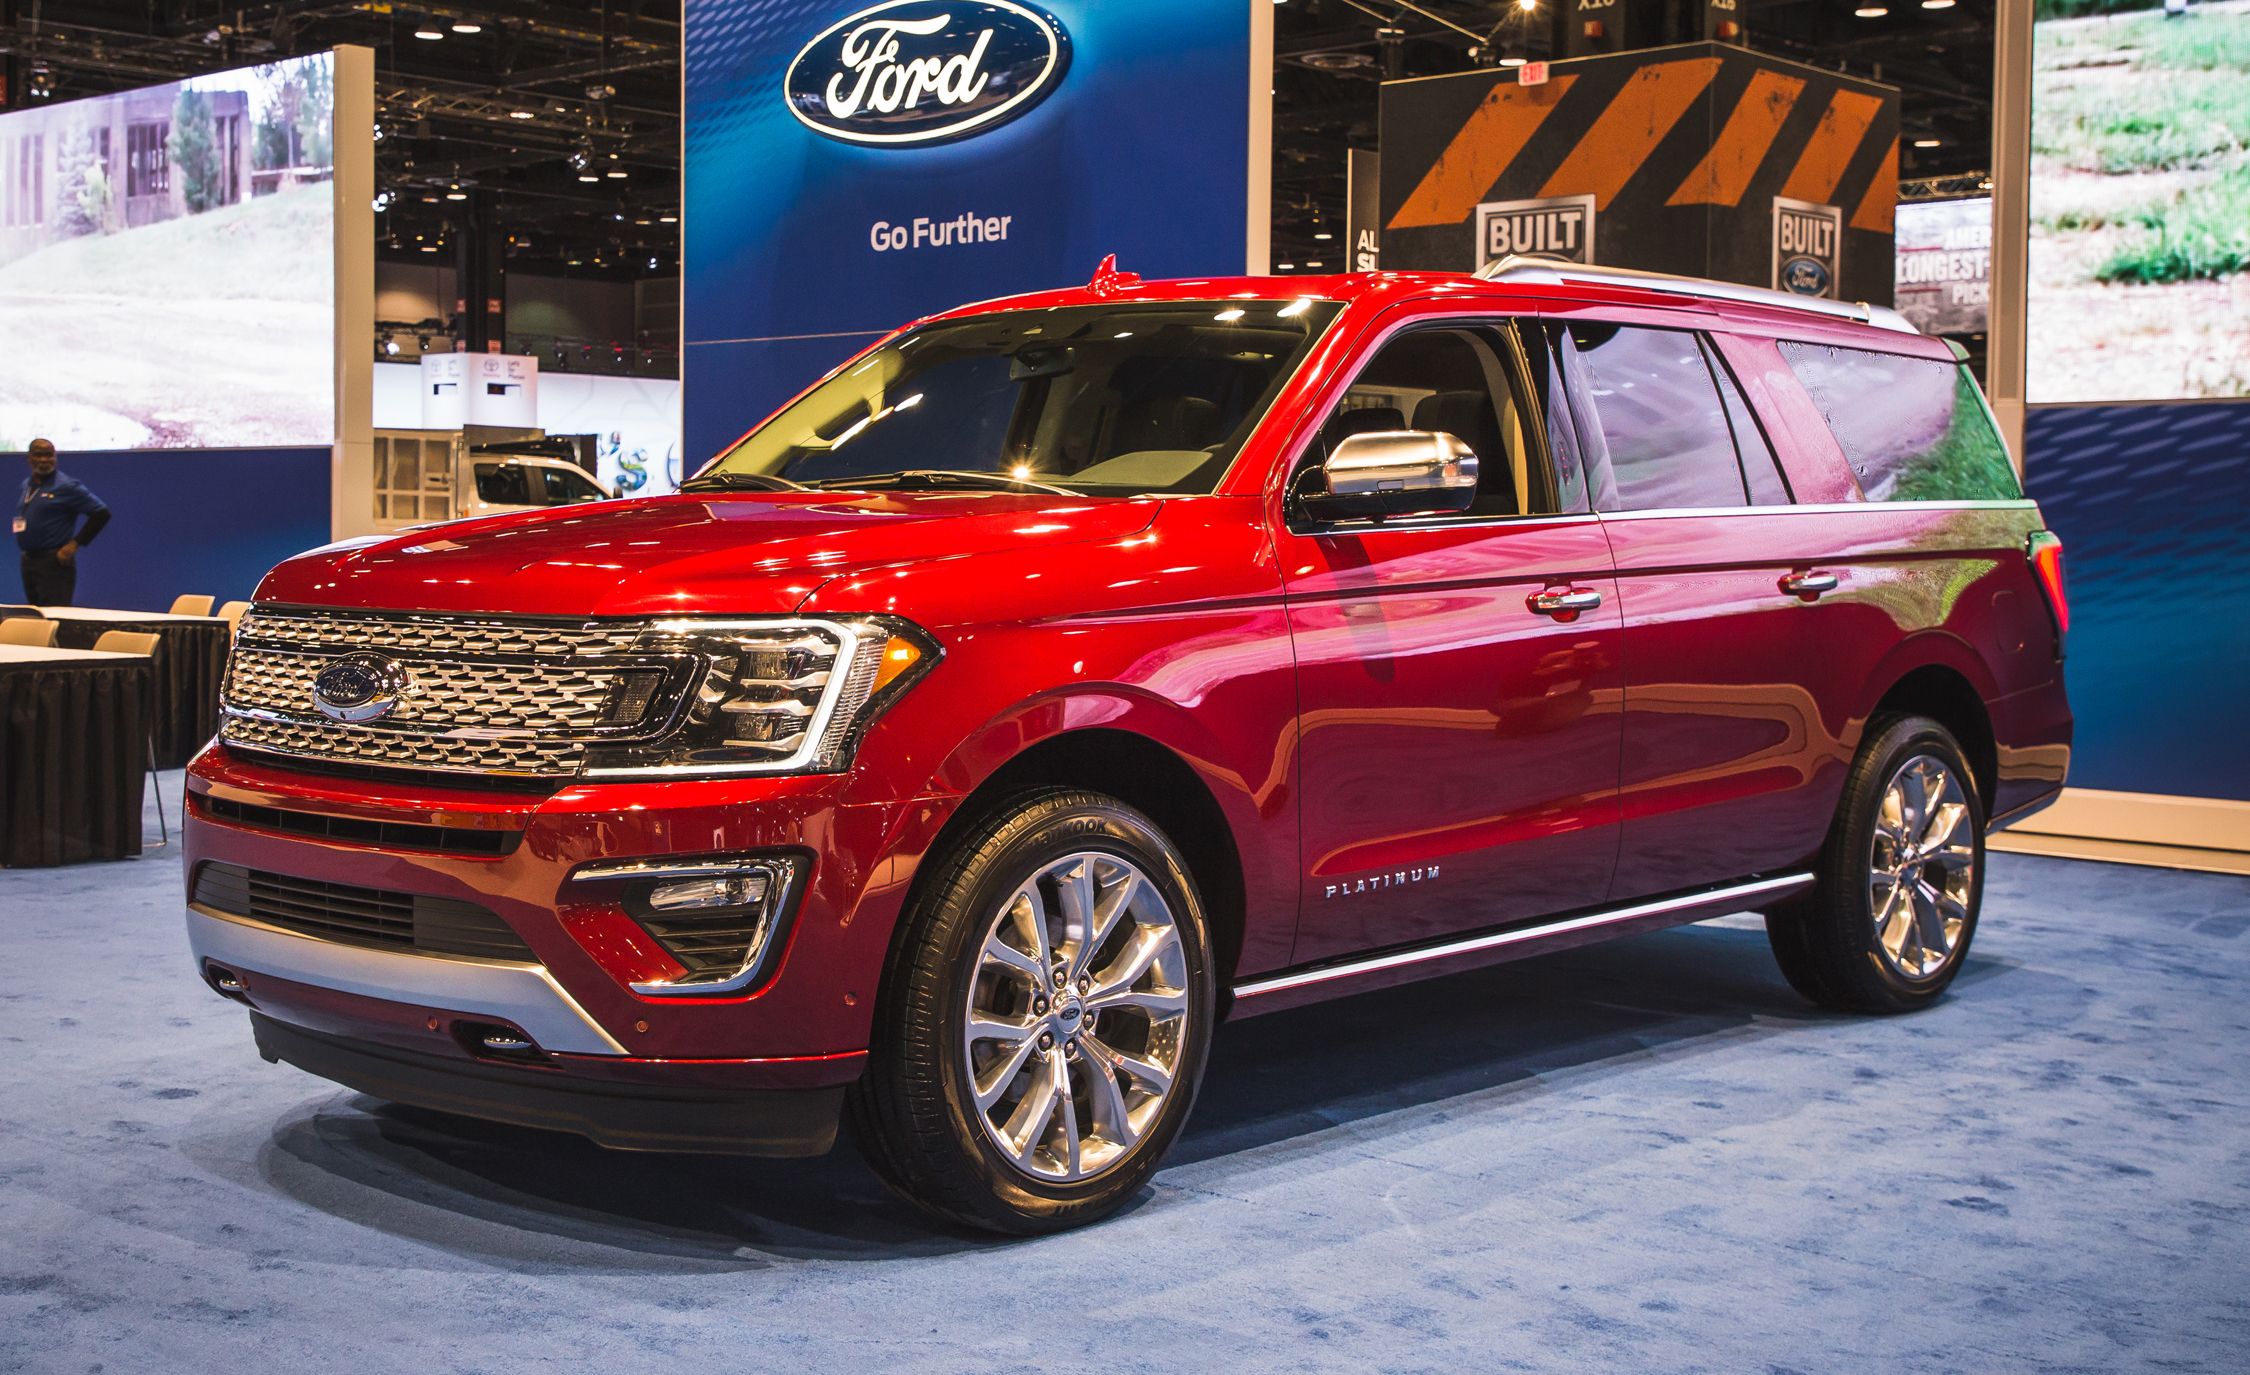 2018 Ford Expedition Photos and Info &#8211; News &#8211; Car and Driver